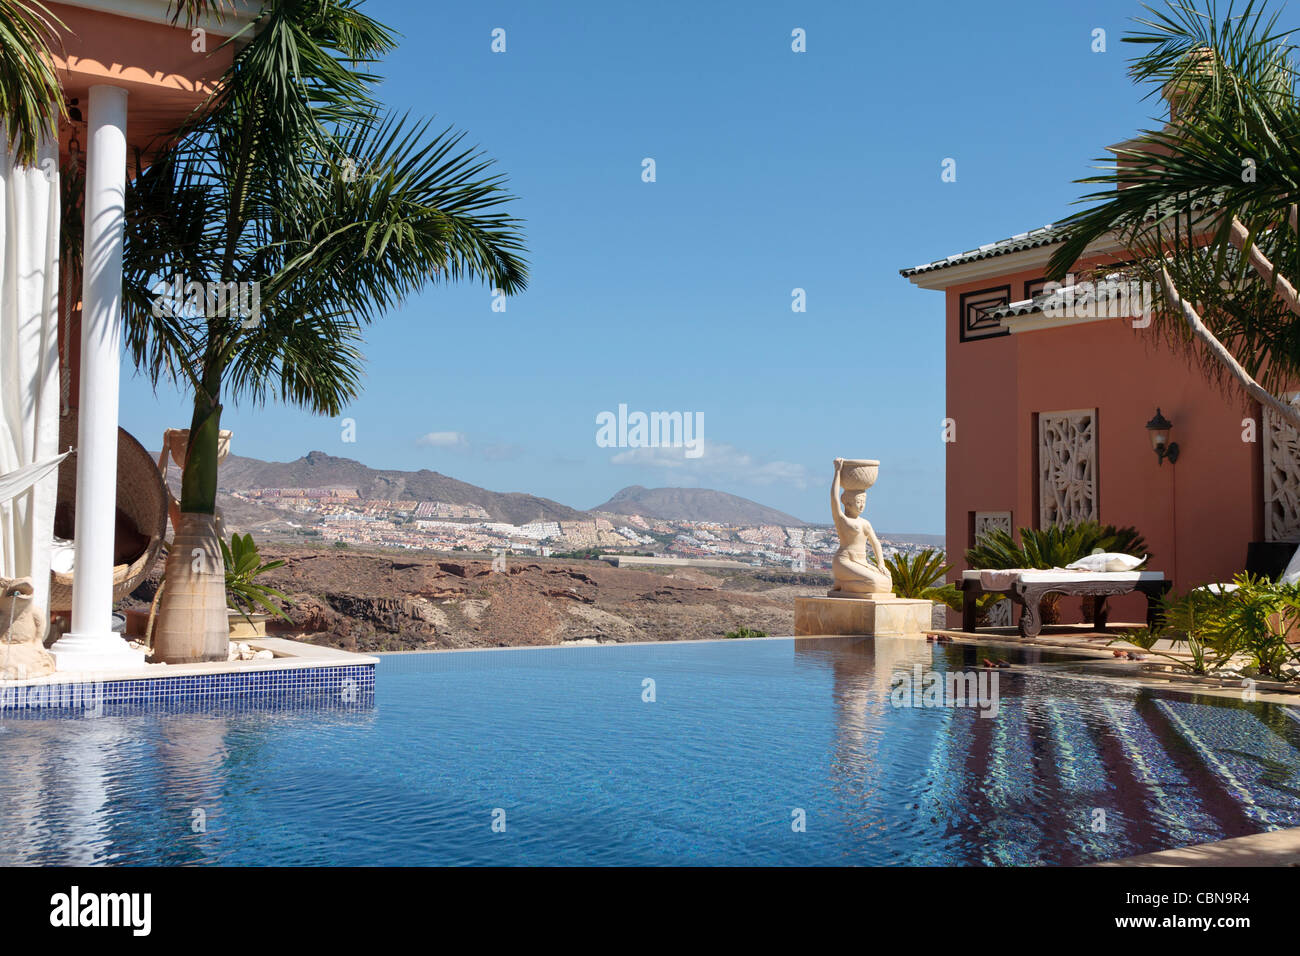 Infinity pool at the royal garden villas in tenerife canary islands spain Stock Photo